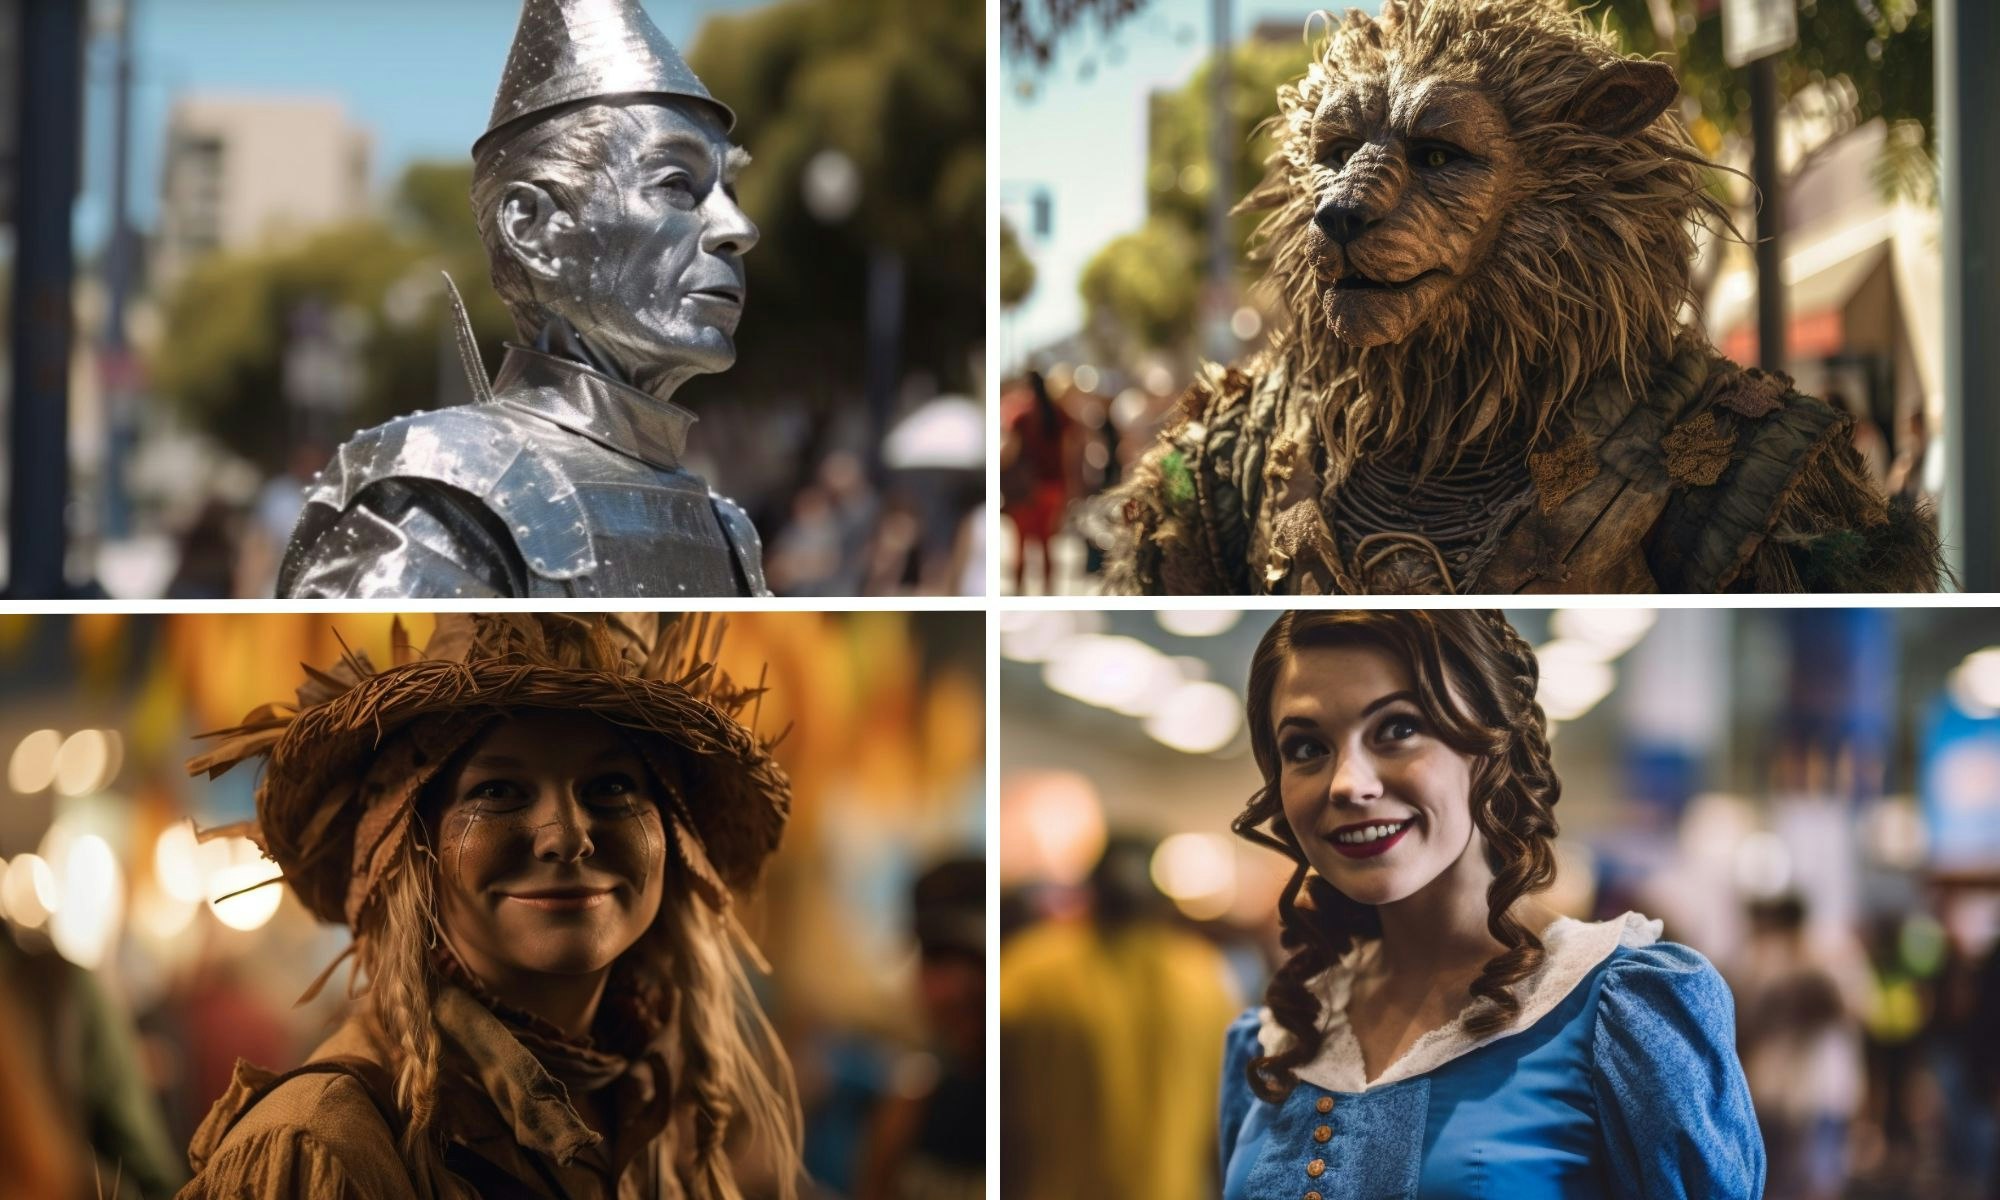 The Wizard of Oz Experience in Toowoomba